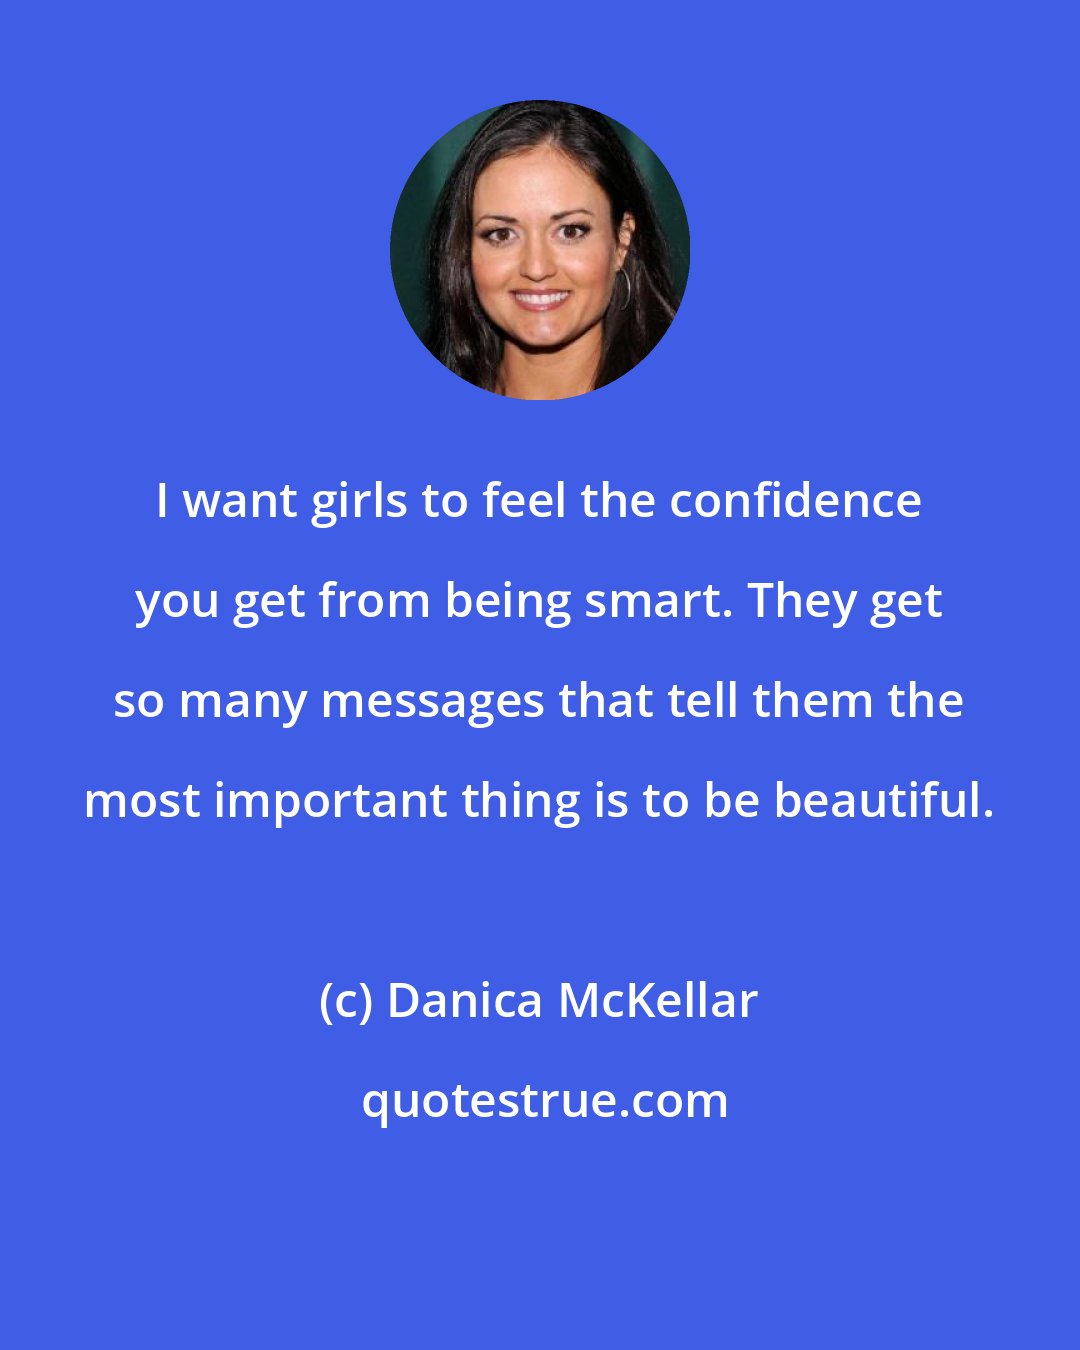 Danica McKellar: I want girls to feel the confidence you get from being smart. They get so many messages that tell them the most important thing is to be beautiful.